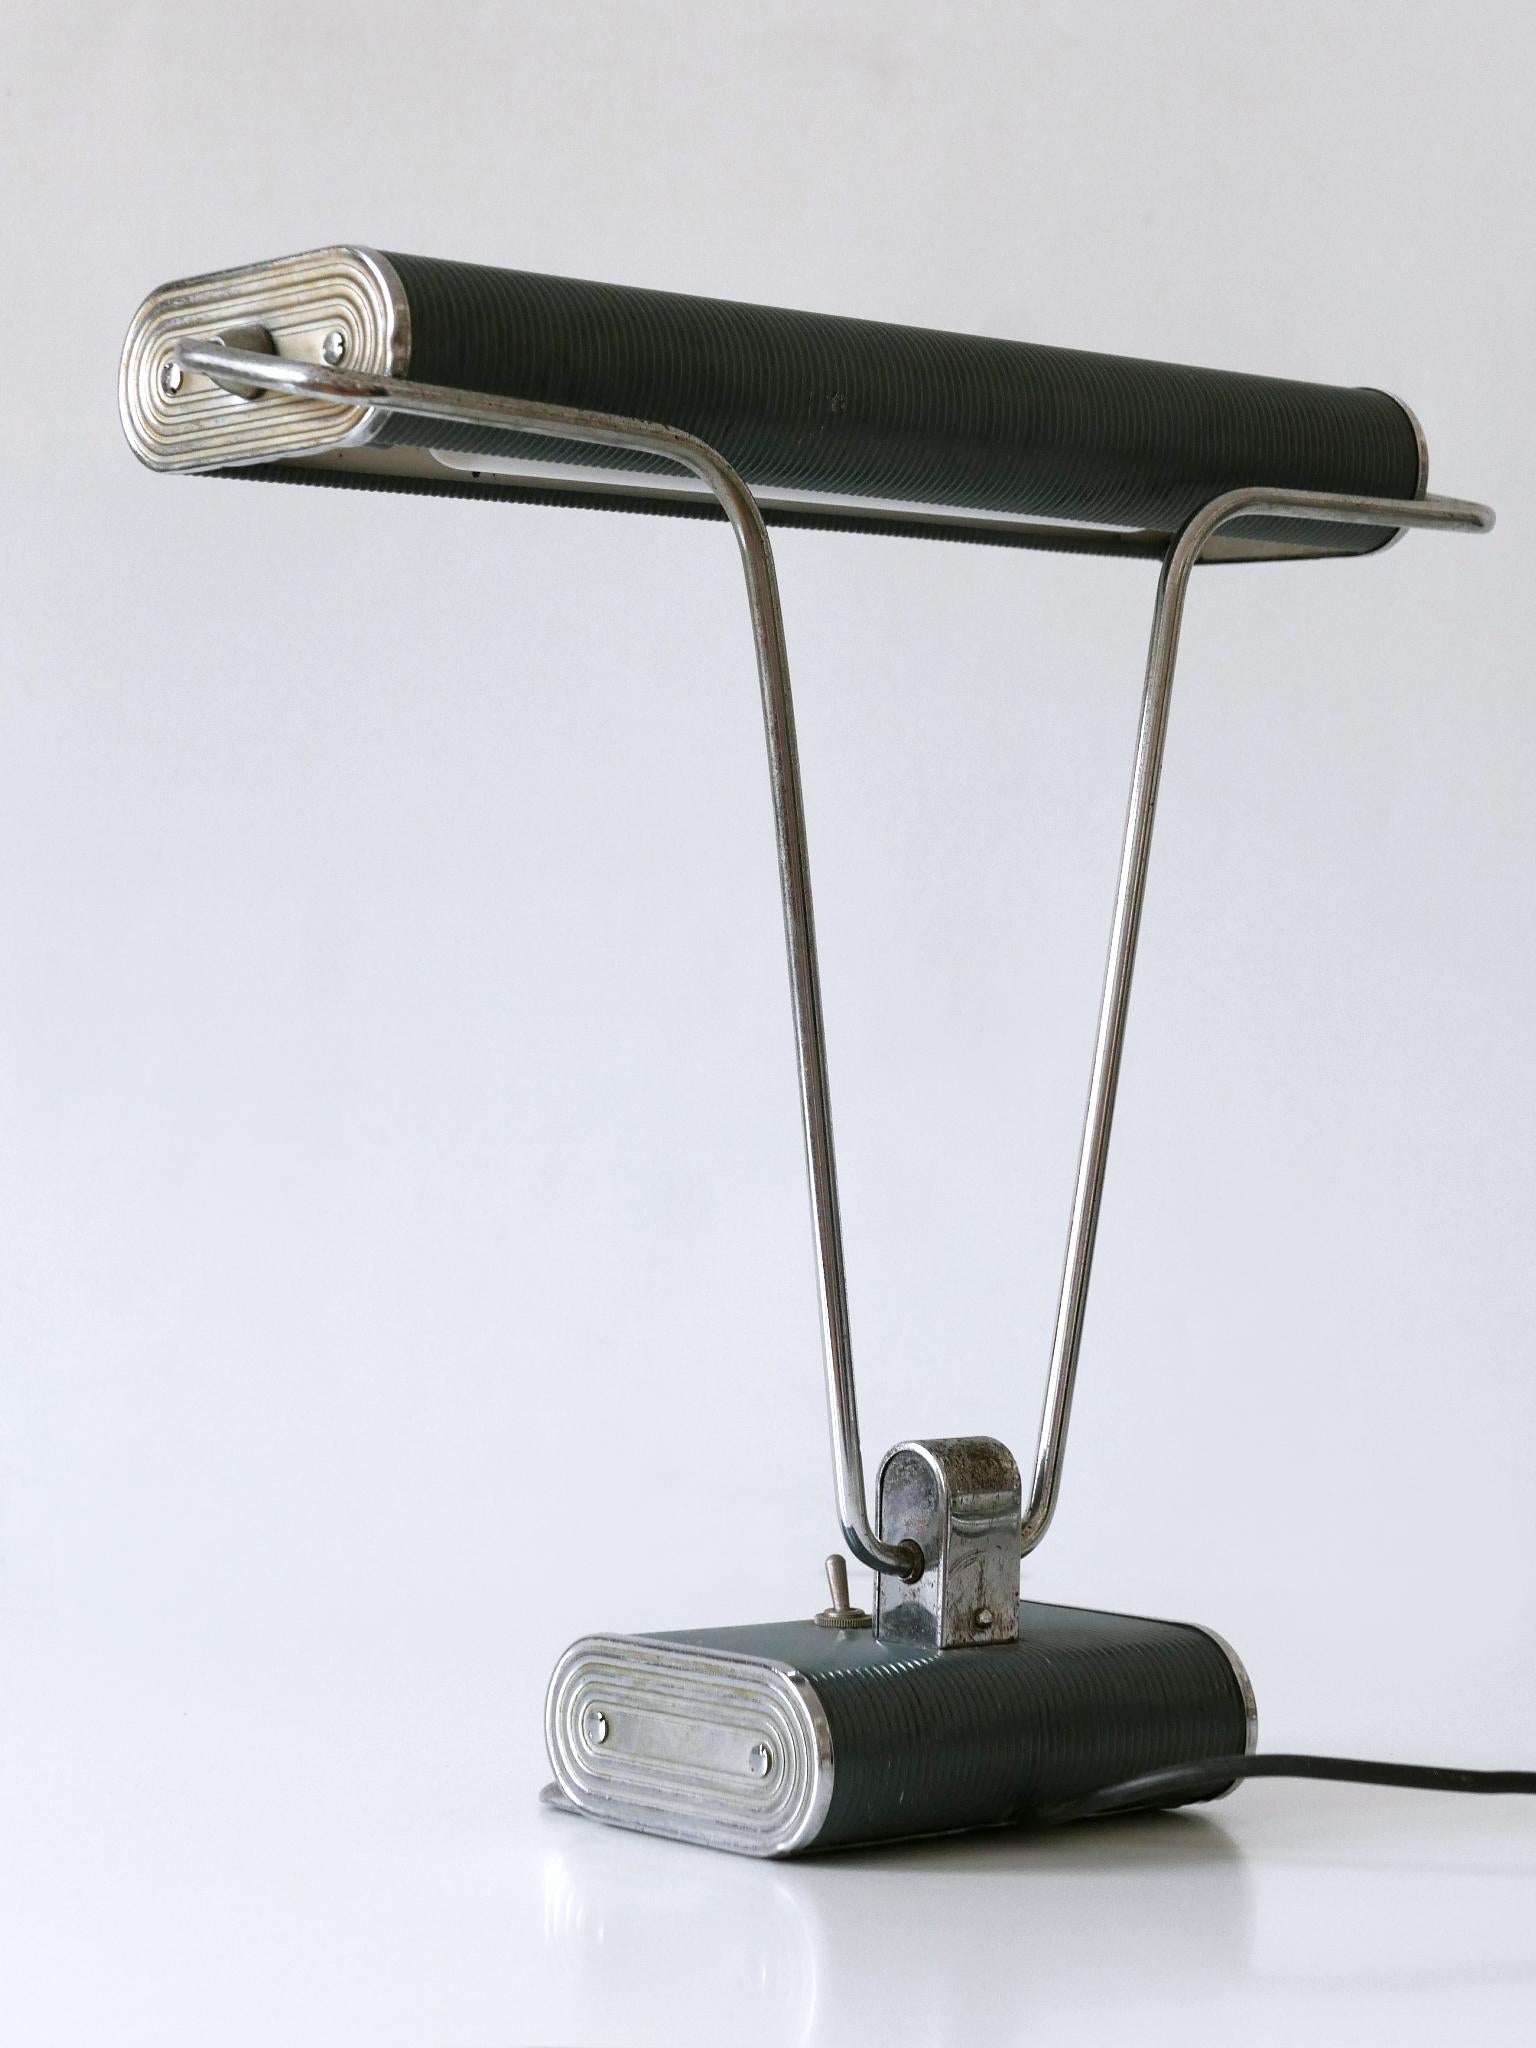 French Art Deco Table Lamp or Desk Light 'No 71' by André Mounique for Jumo 1930s For Sale